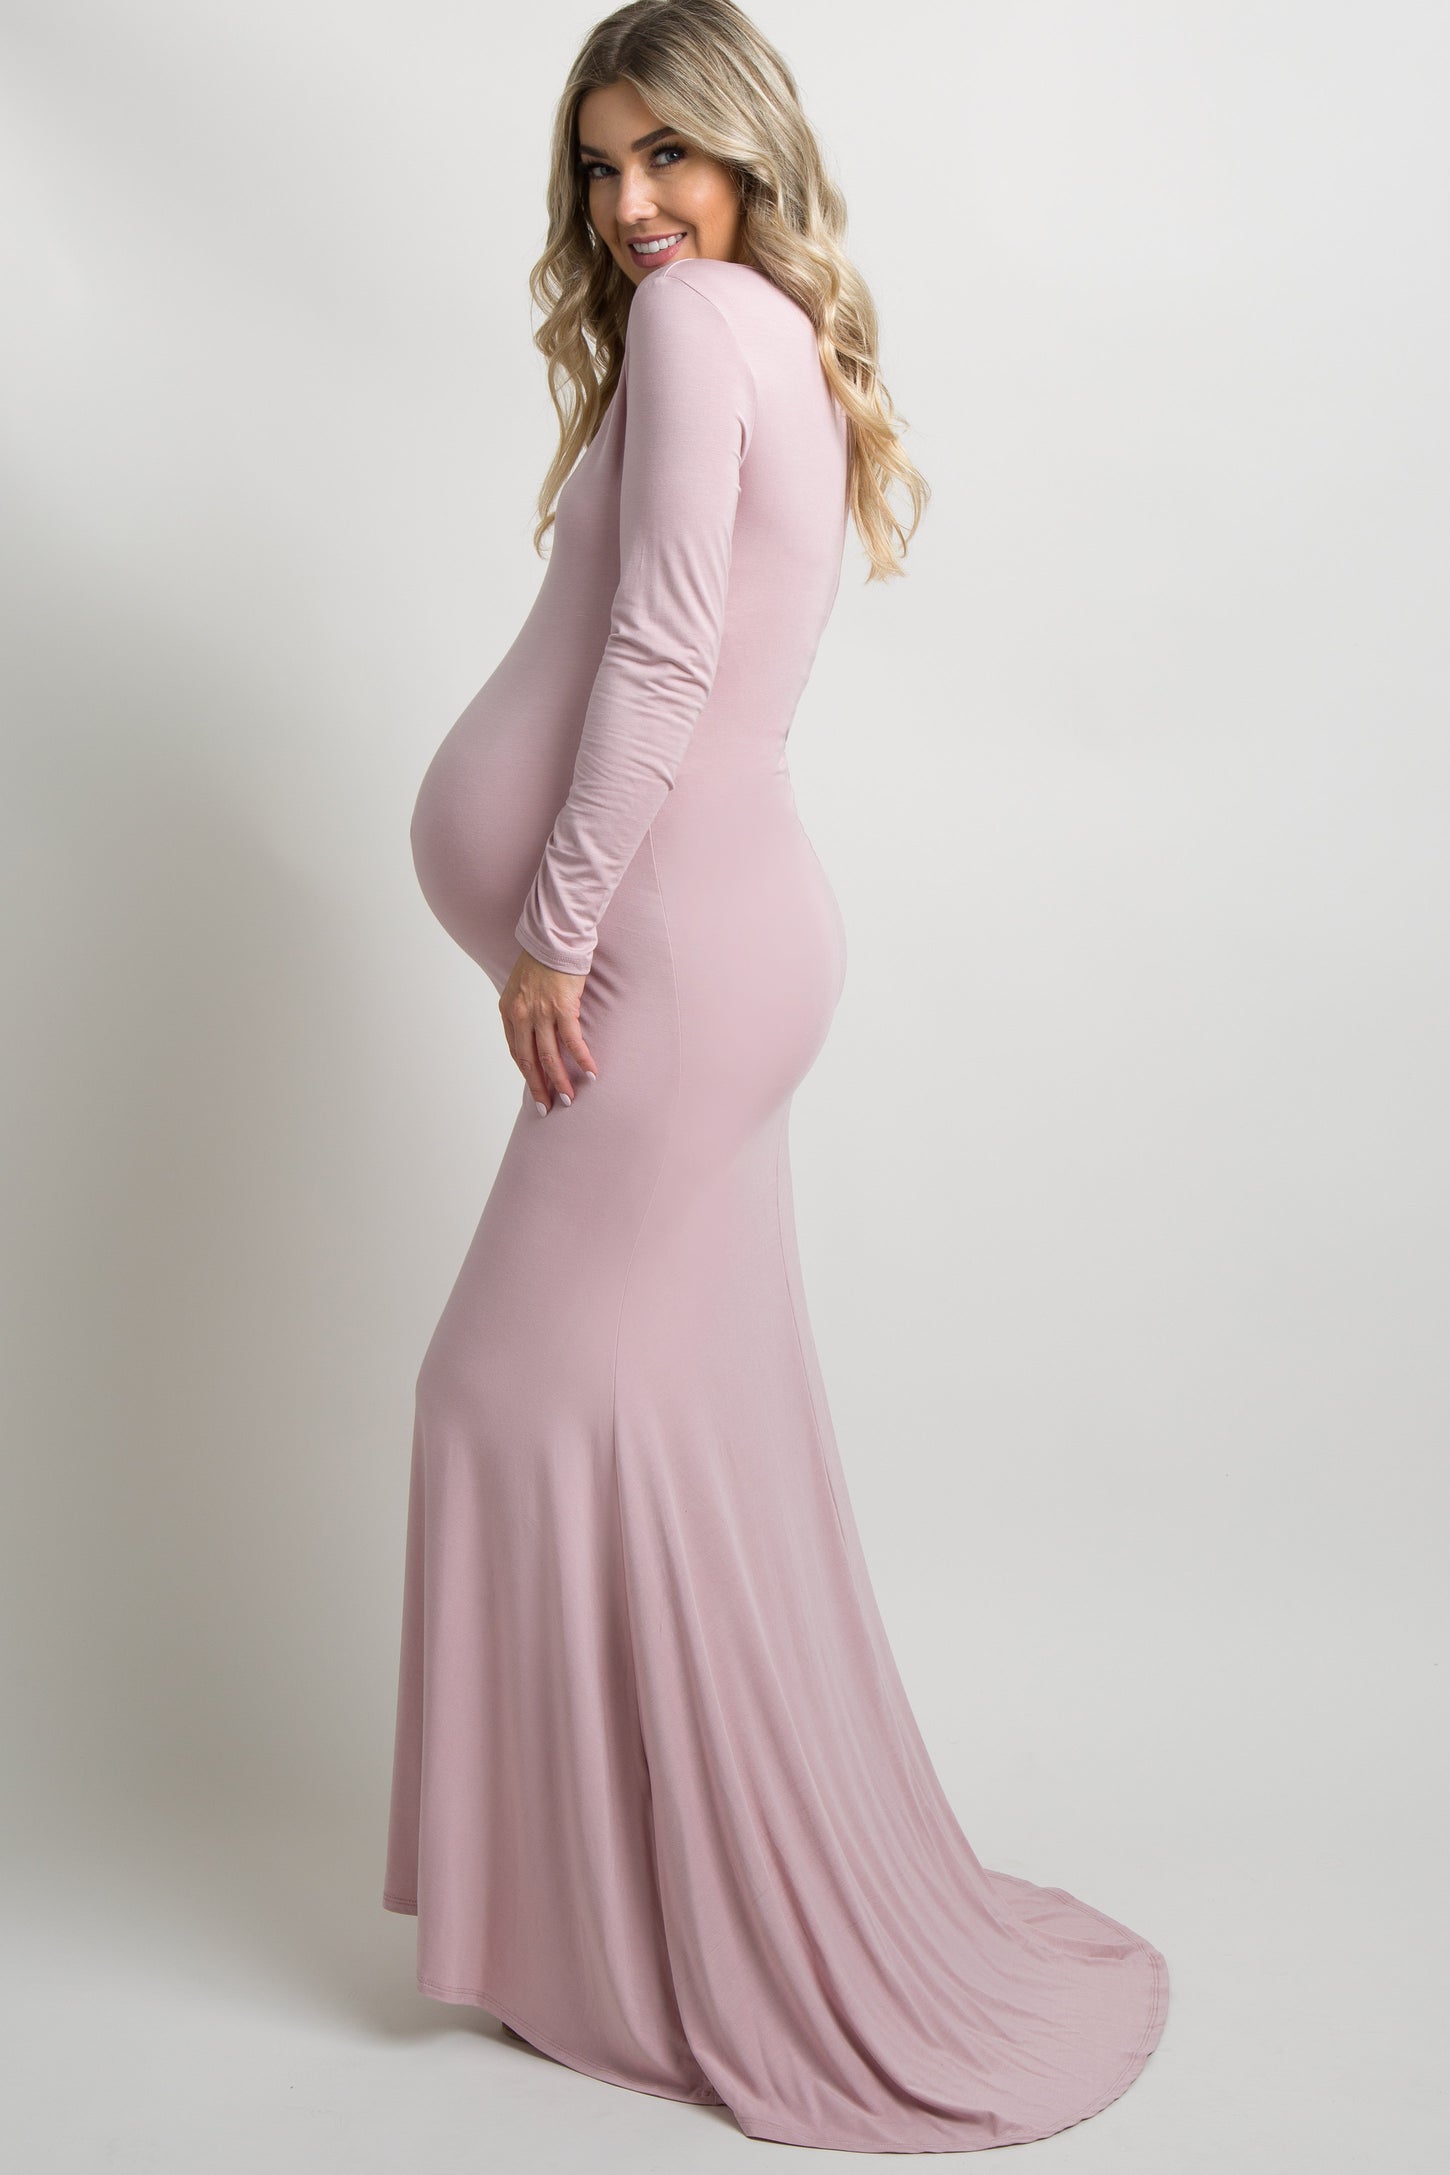 Baby Shower Top in Blush Pink - Sexy Mama Maternity